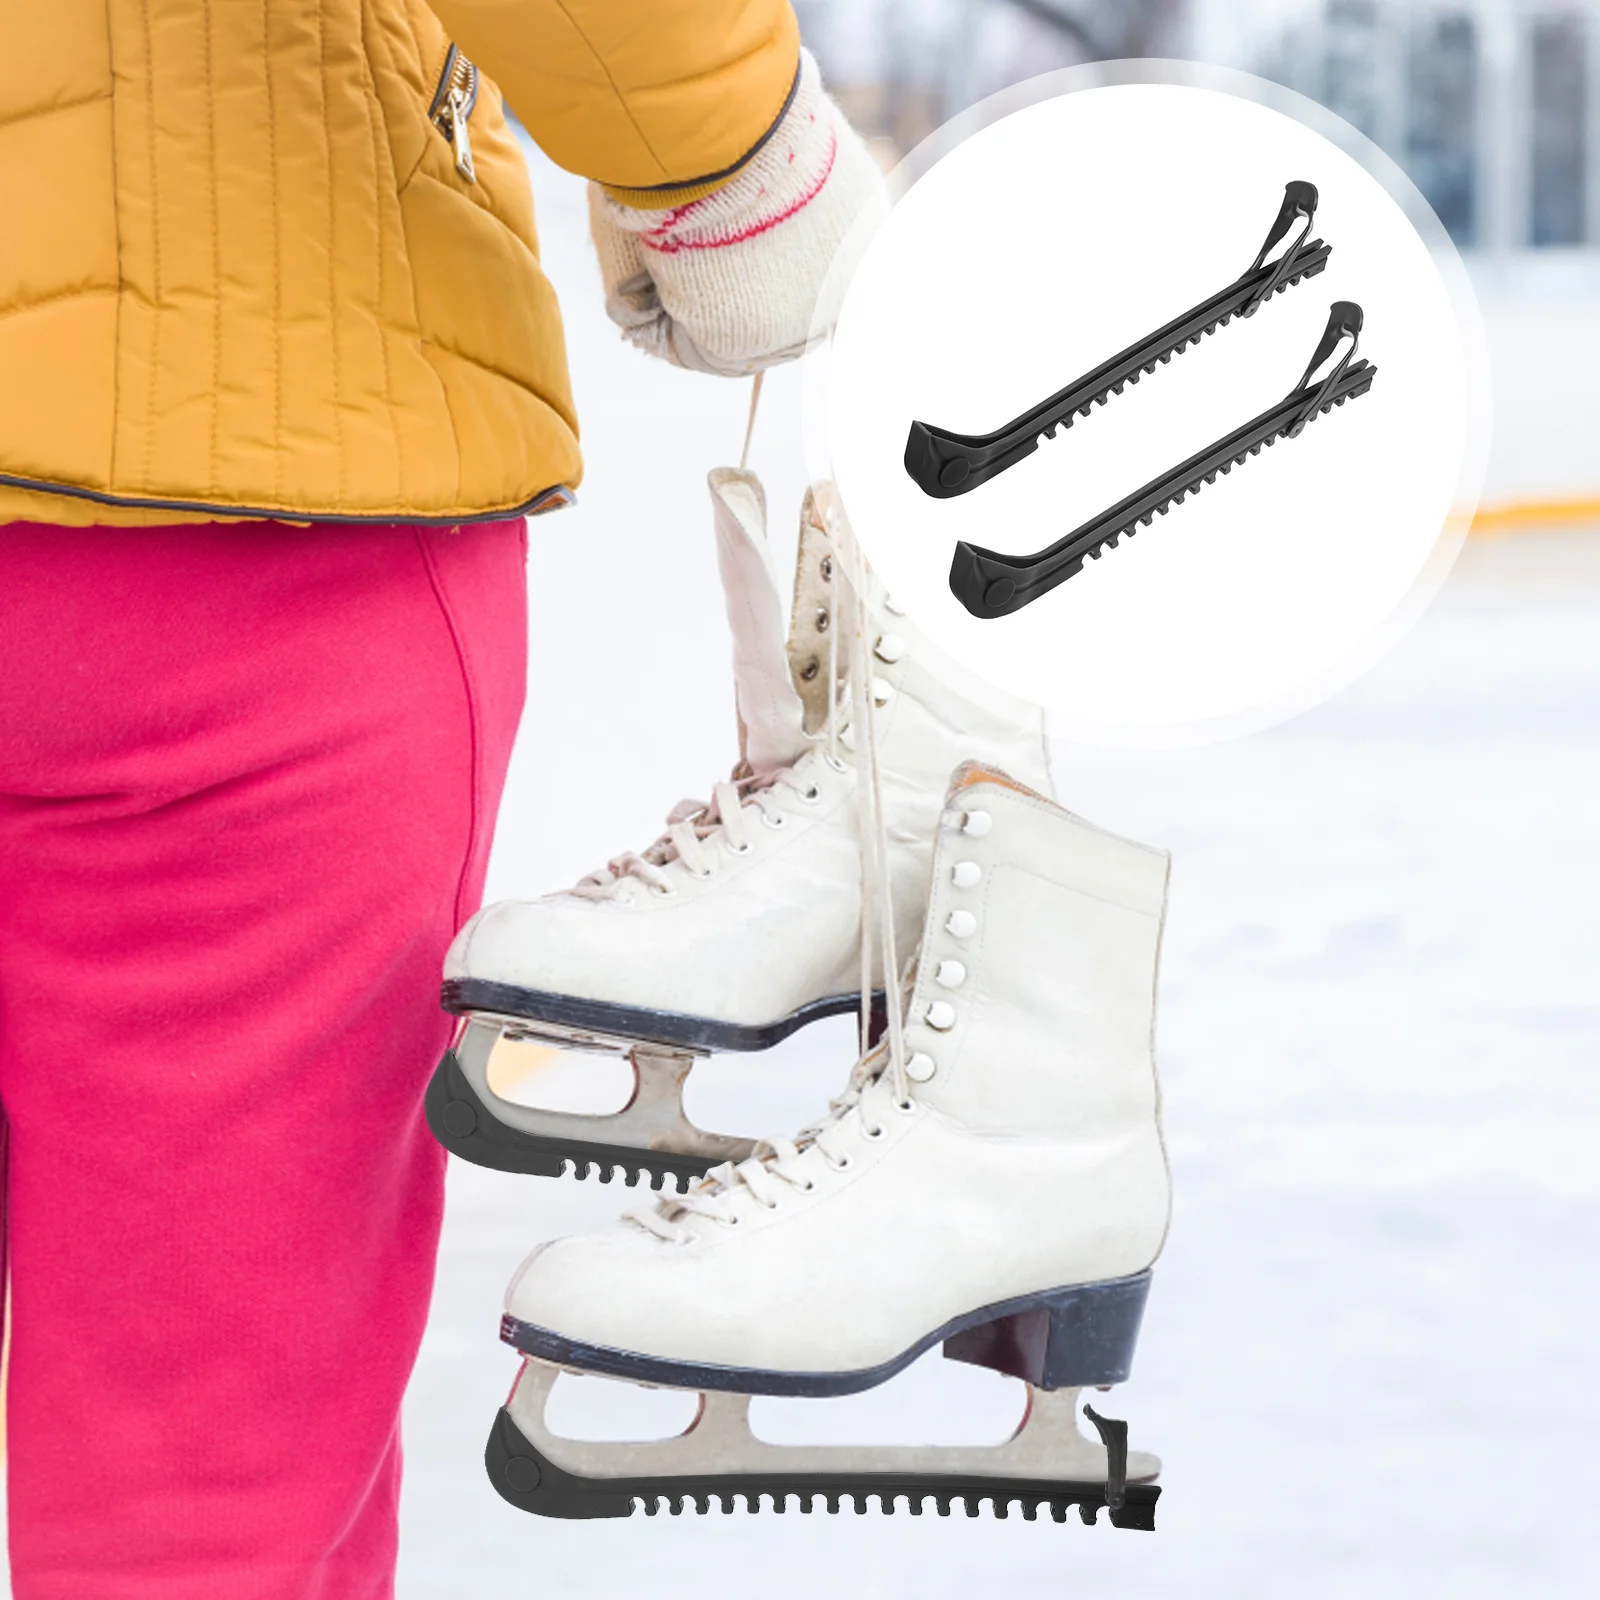 

Ice Skates Covers Skating Blades Protector Can Be Cut Guard Guards Environmental Protection Pxc Synthesis Shoe Shoes Protective